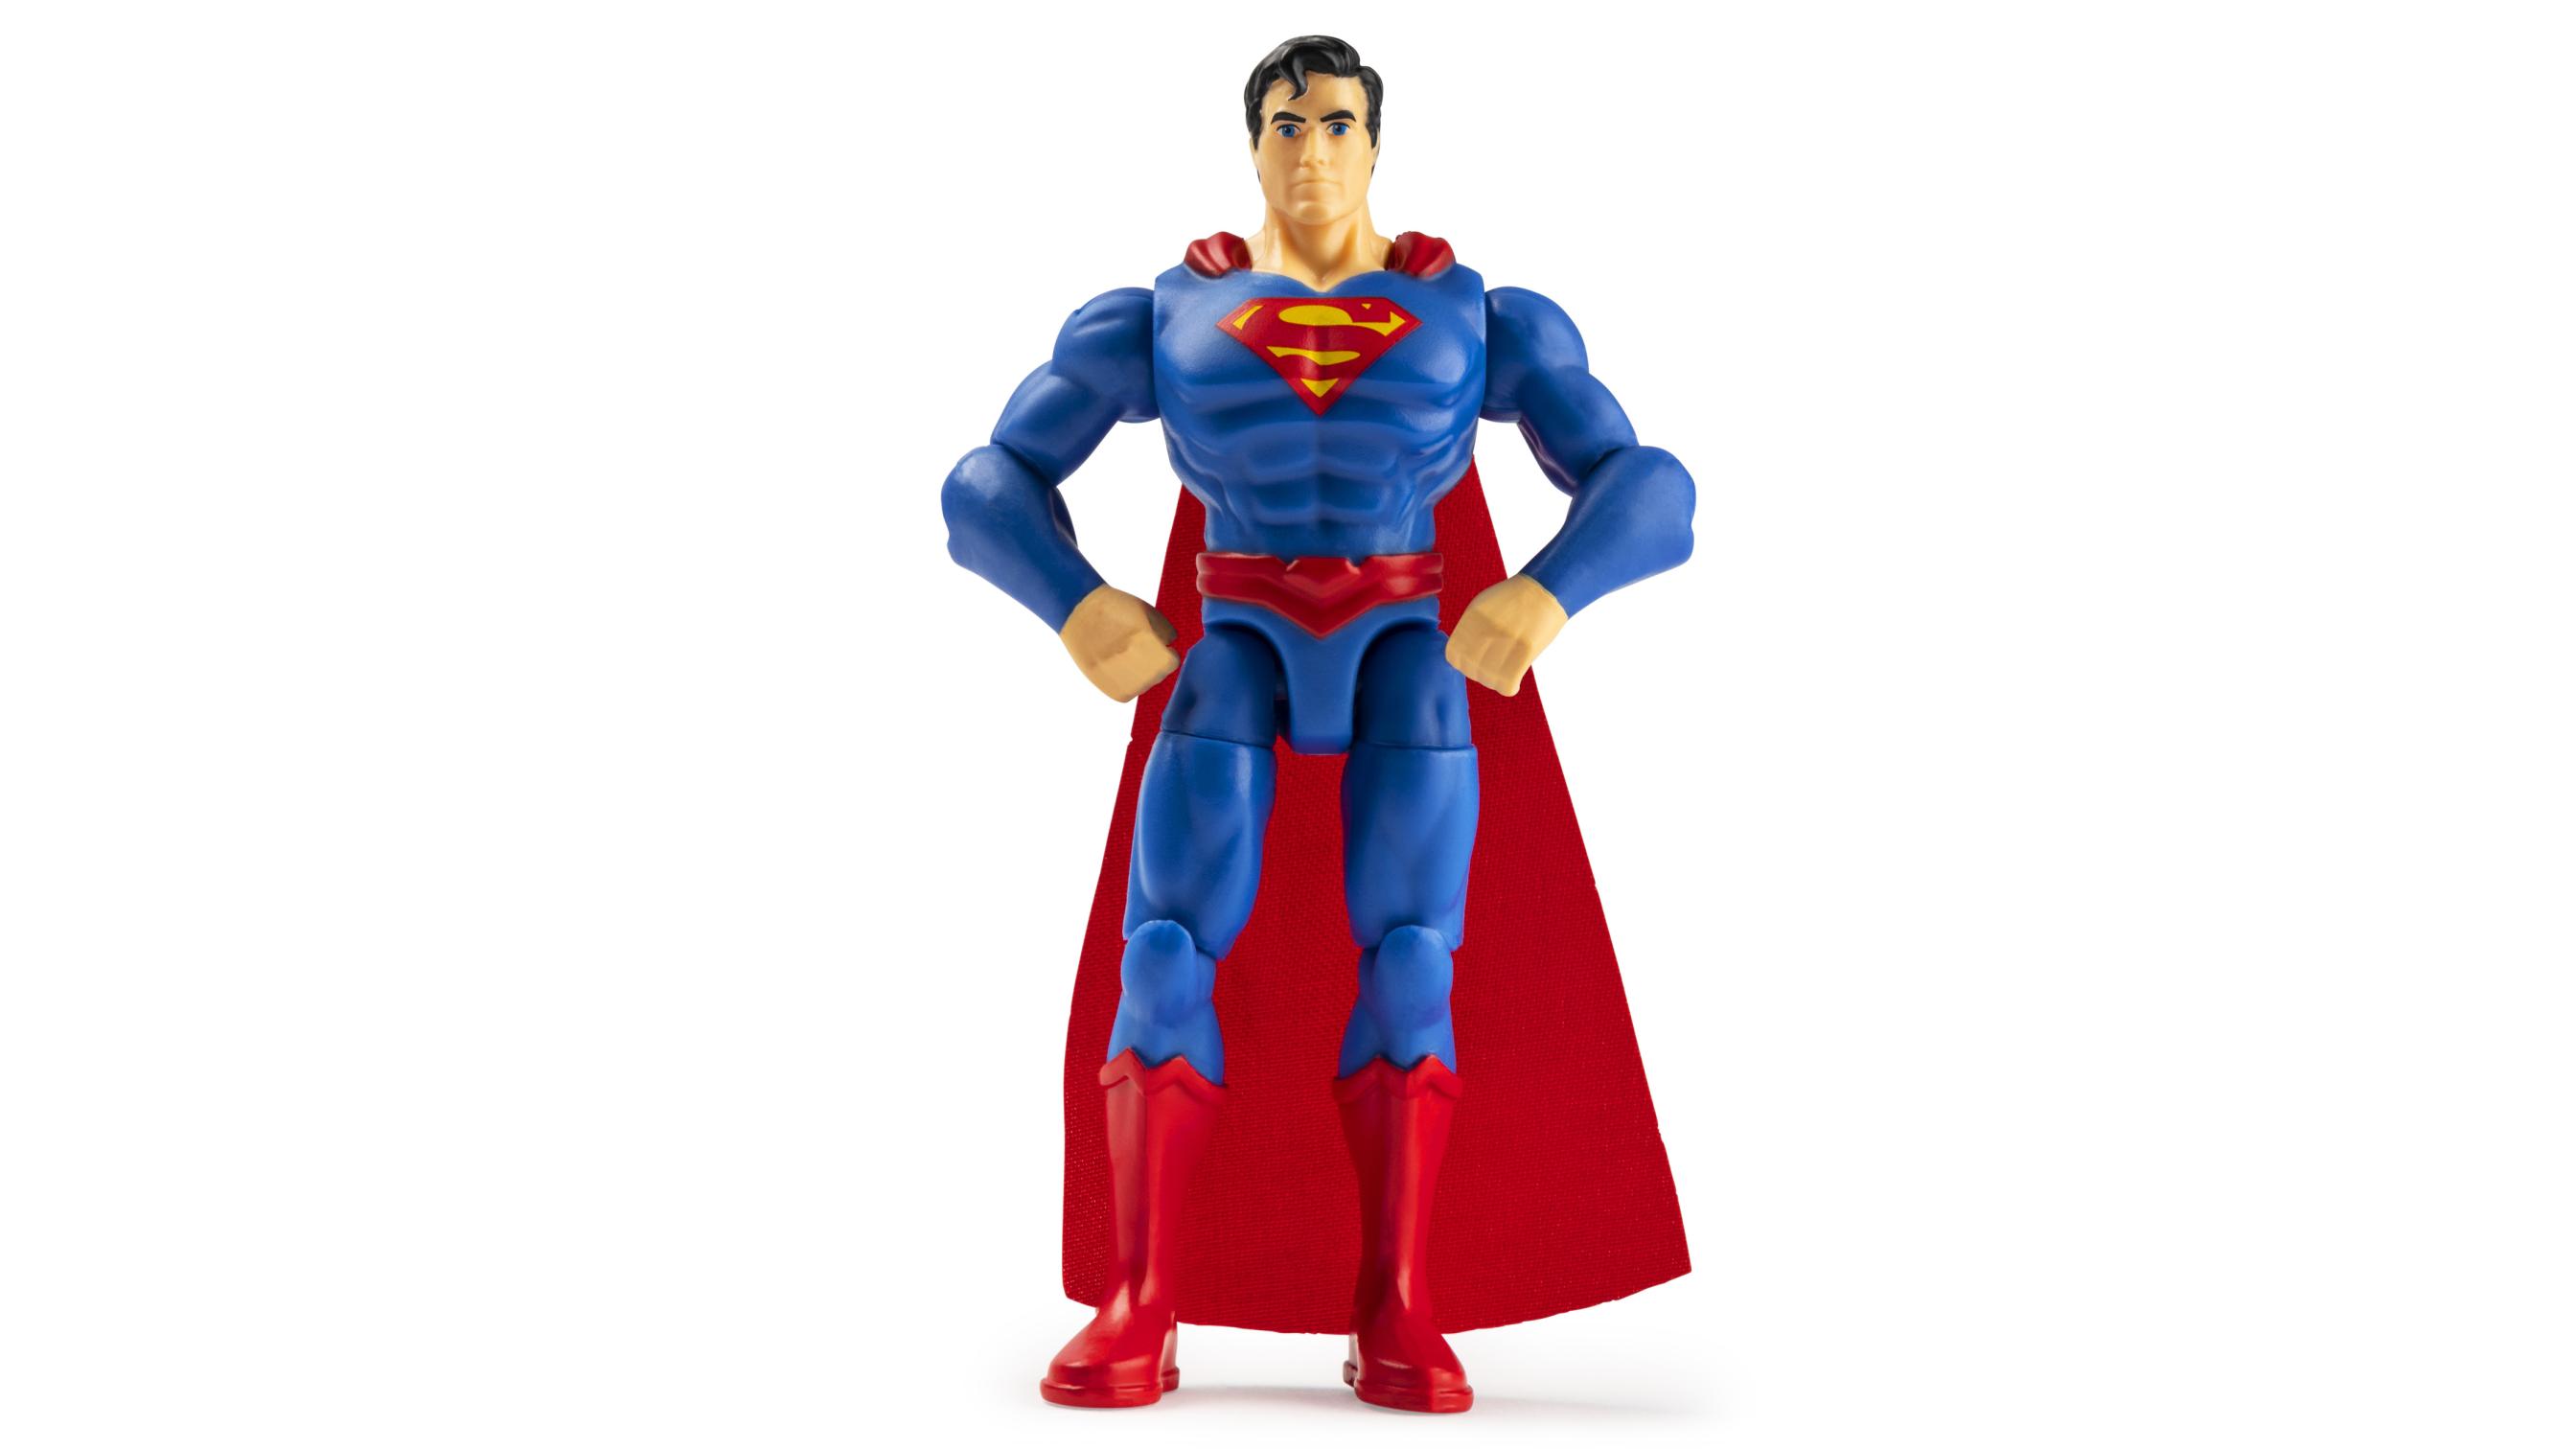 DC Heroes Unite Superman Action Figure 4'' with 3 Mystery Accessories for  Kids Aged 3 and up | Delivery Near Me - Doordash